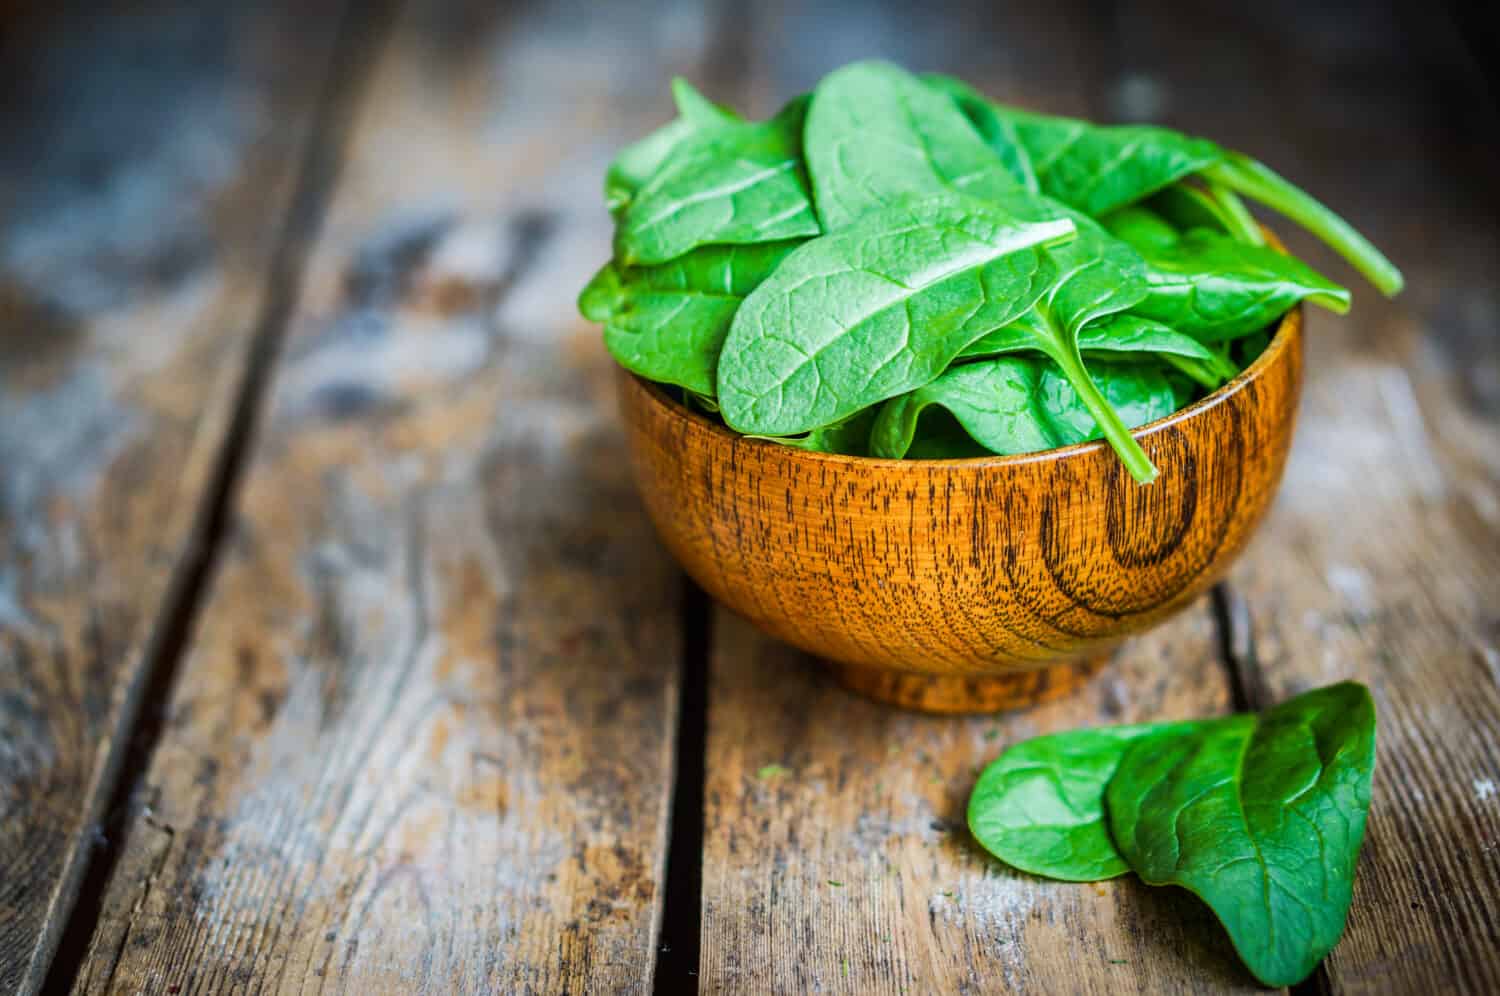 Fresh spinach in a bowl on rustic wooden background